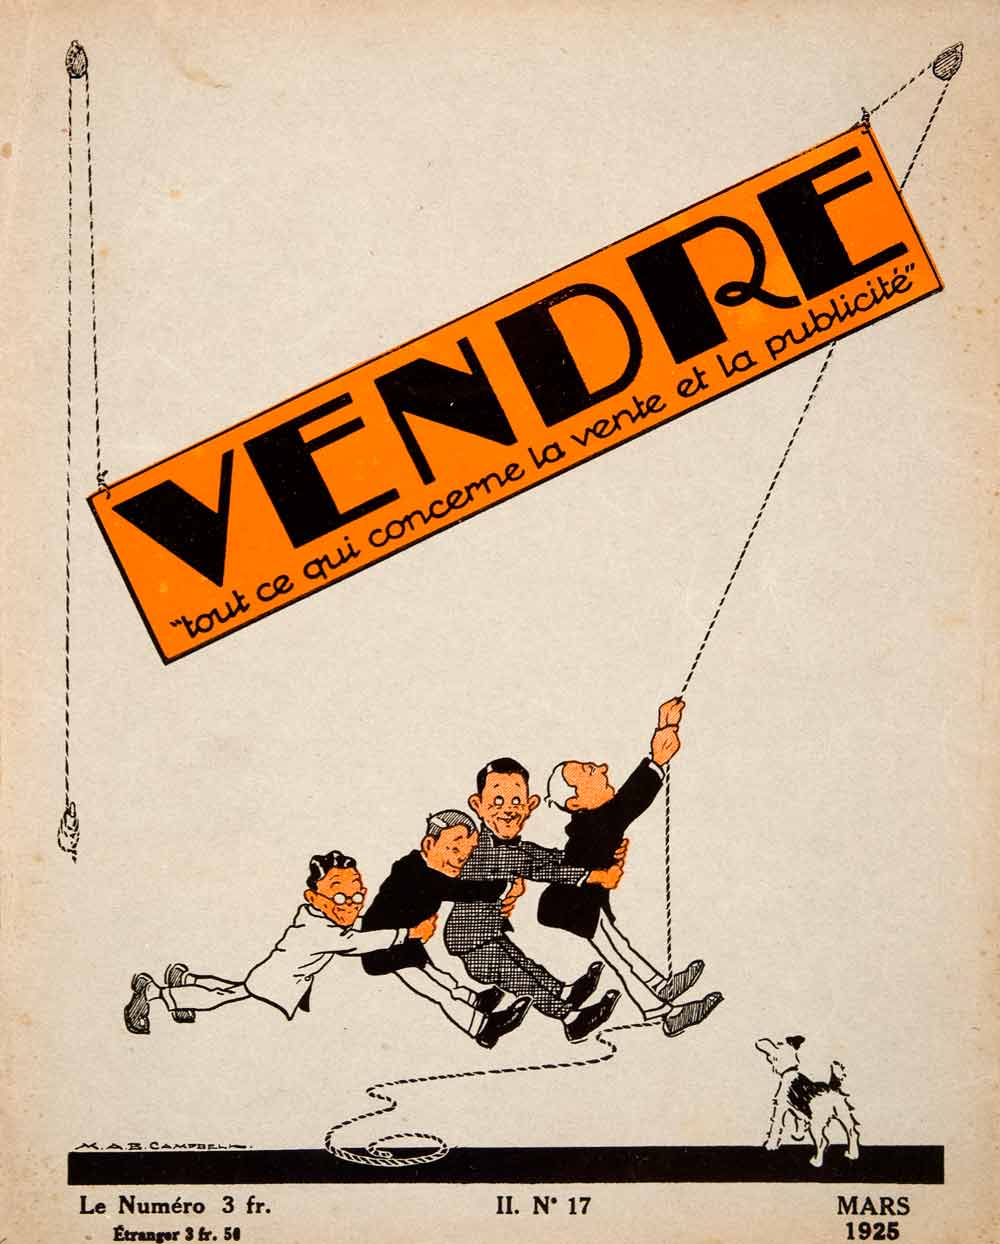 1925 Lithograph Cover Vendre Pulley Dog Etienne Damour Humor Suit France VEN4